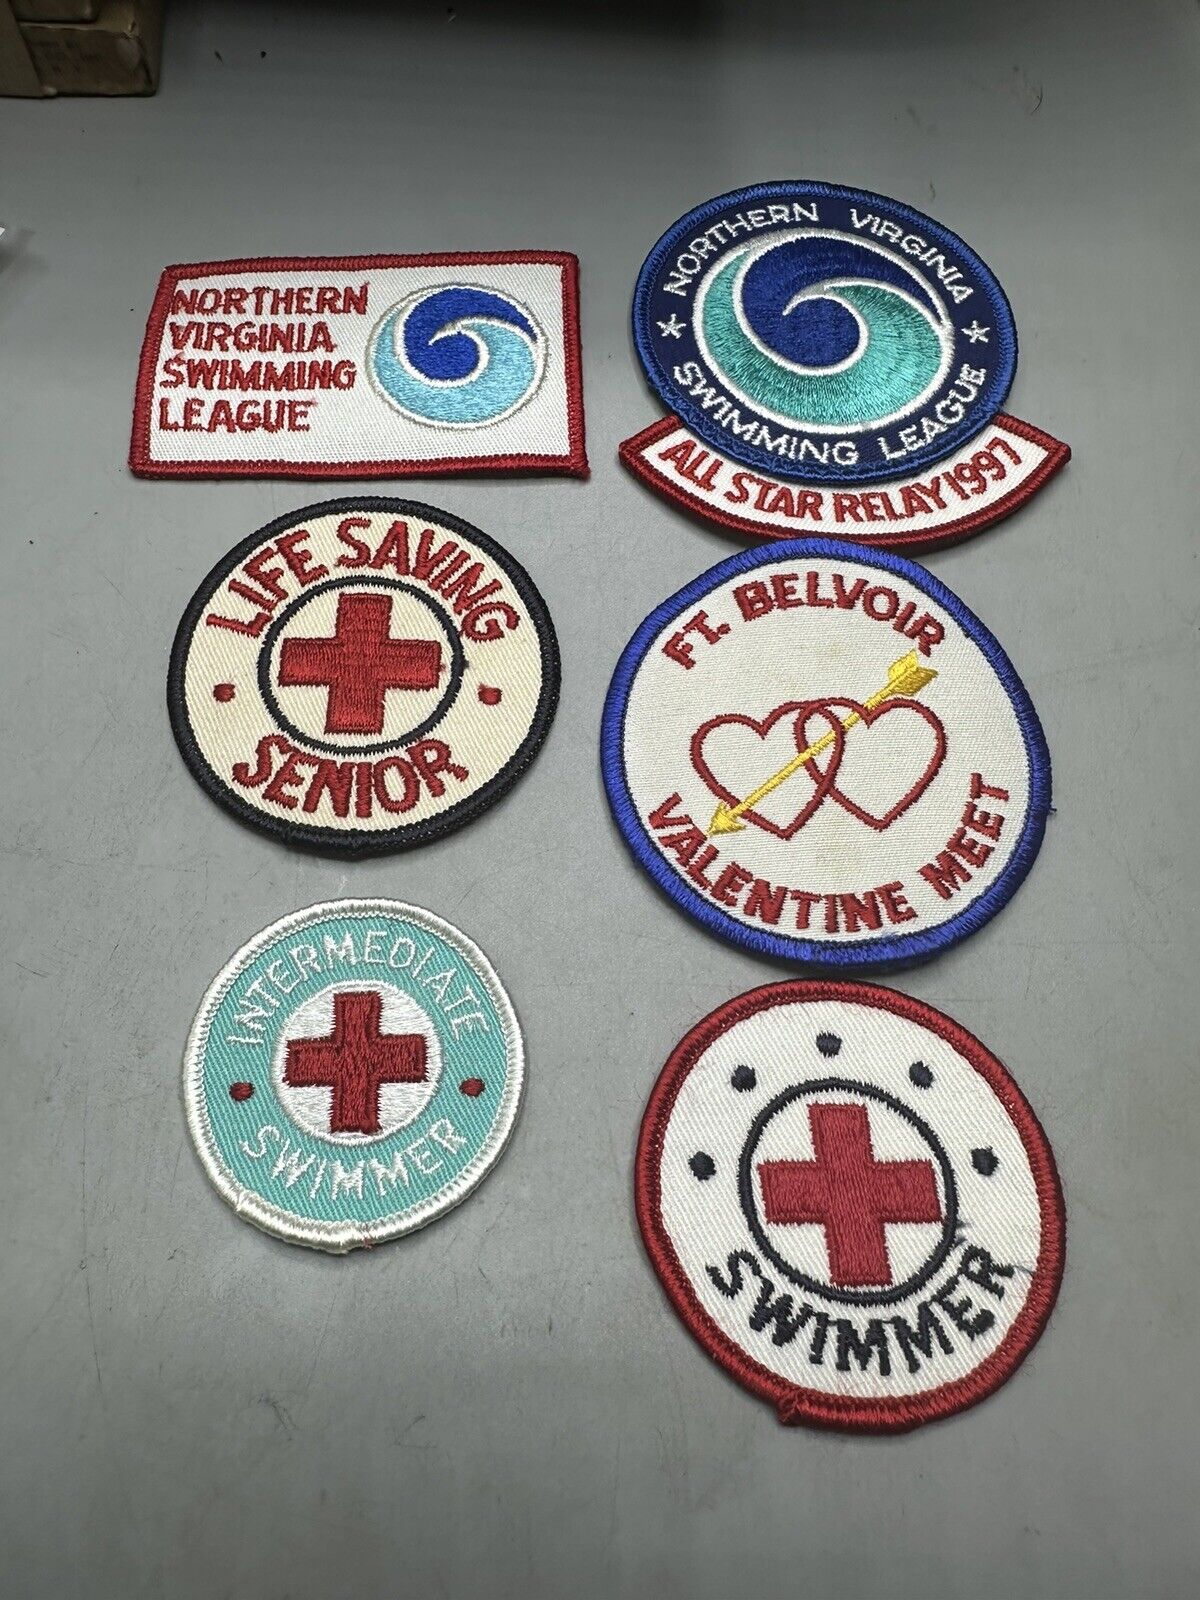 Mixed Lot Of 6 Patches - Life Saving Senior, Intermediate Swimmer, etc...